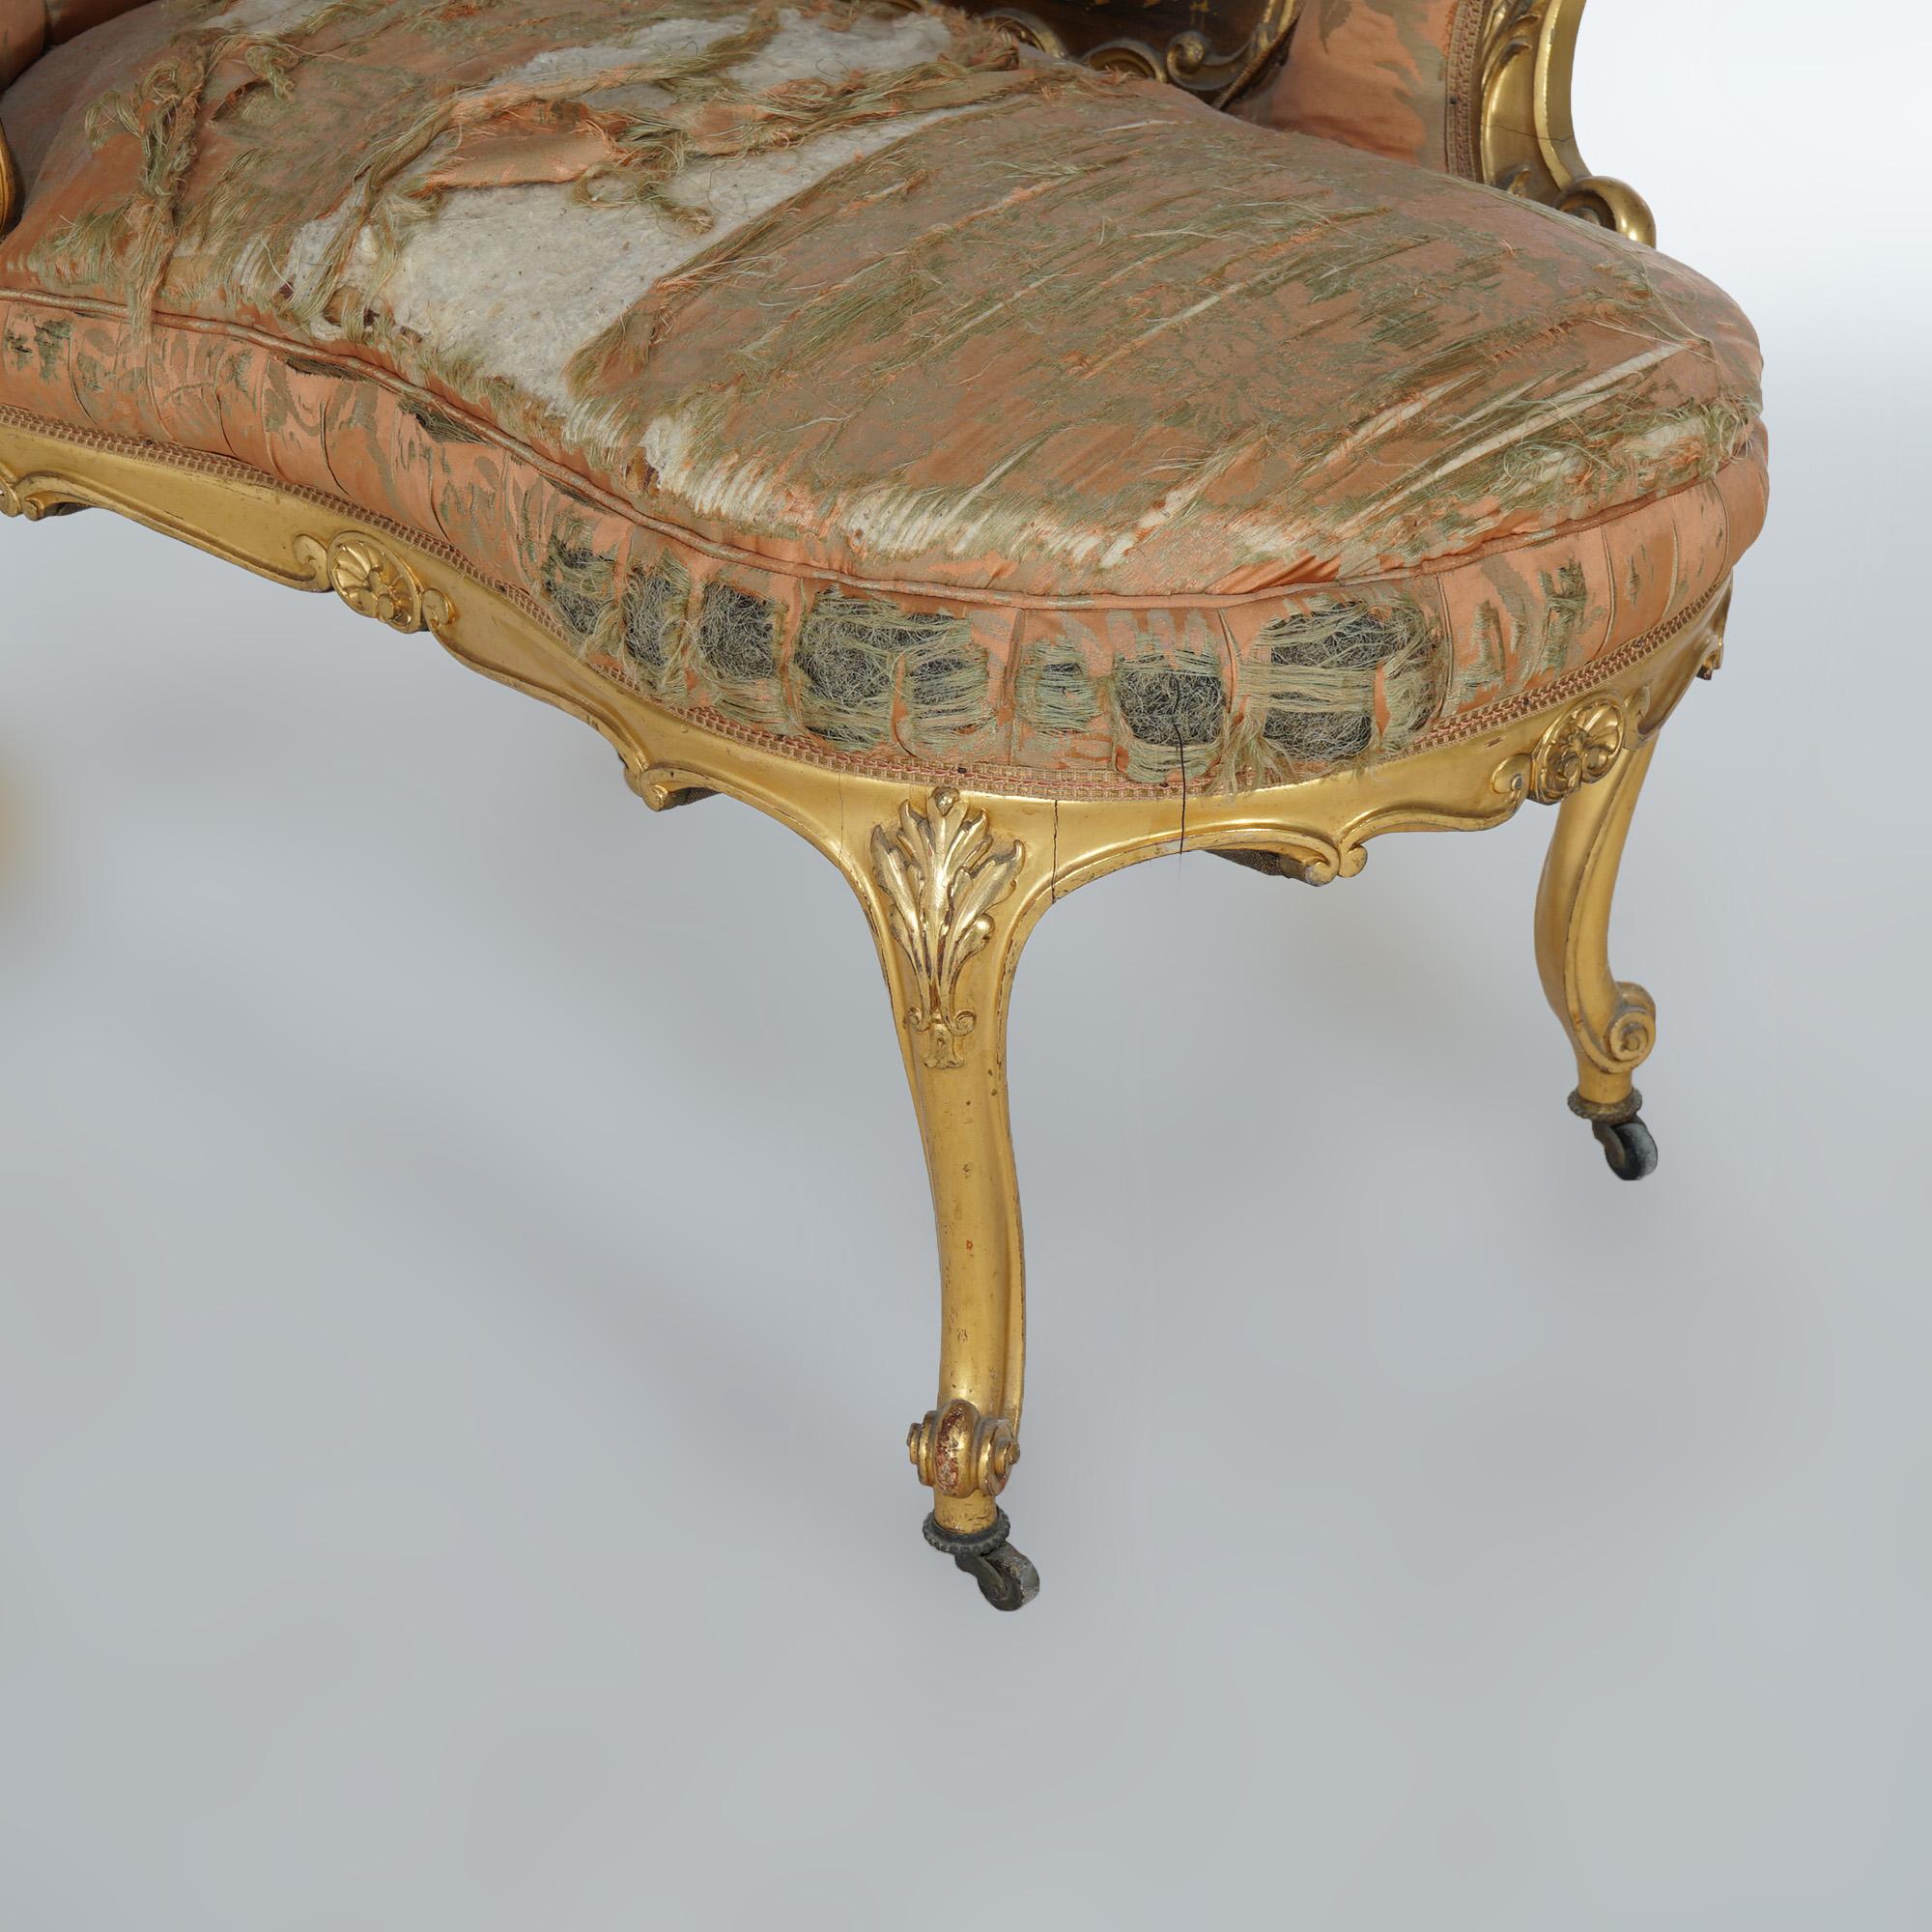 Early Antique French Rococo Vernis Martin & Giltwood Half-Recamier Settee 19th C For Sale 13